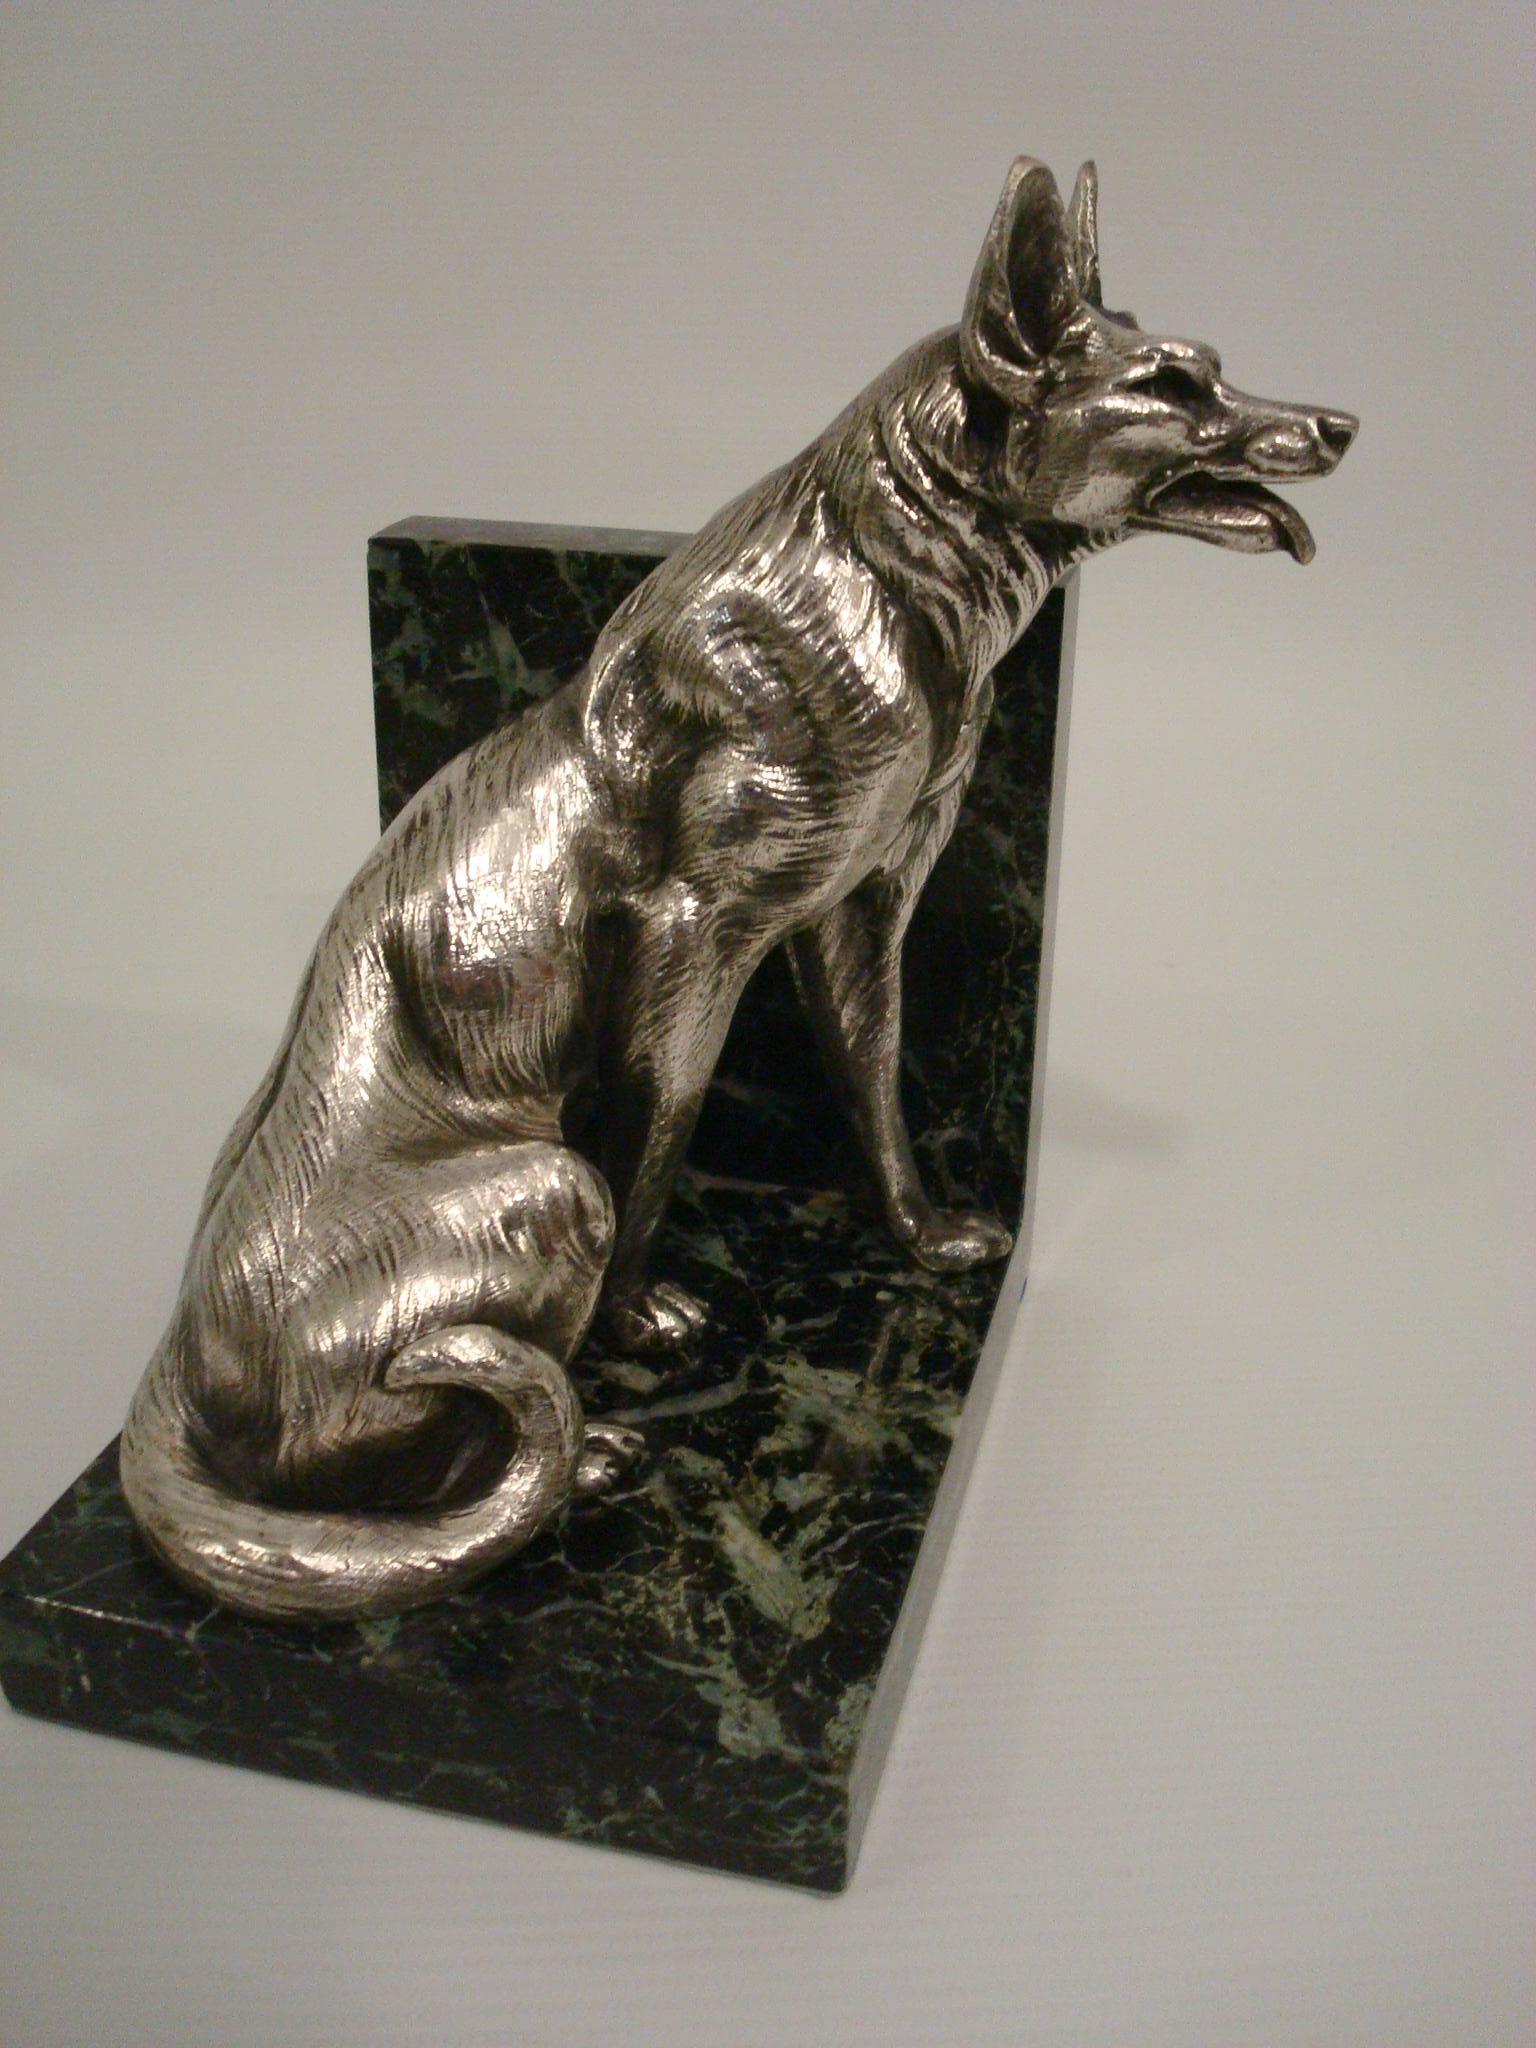 20th Century German Shepherd Dog Sculpture Bookends by Louis-Albert Carvin For Sale